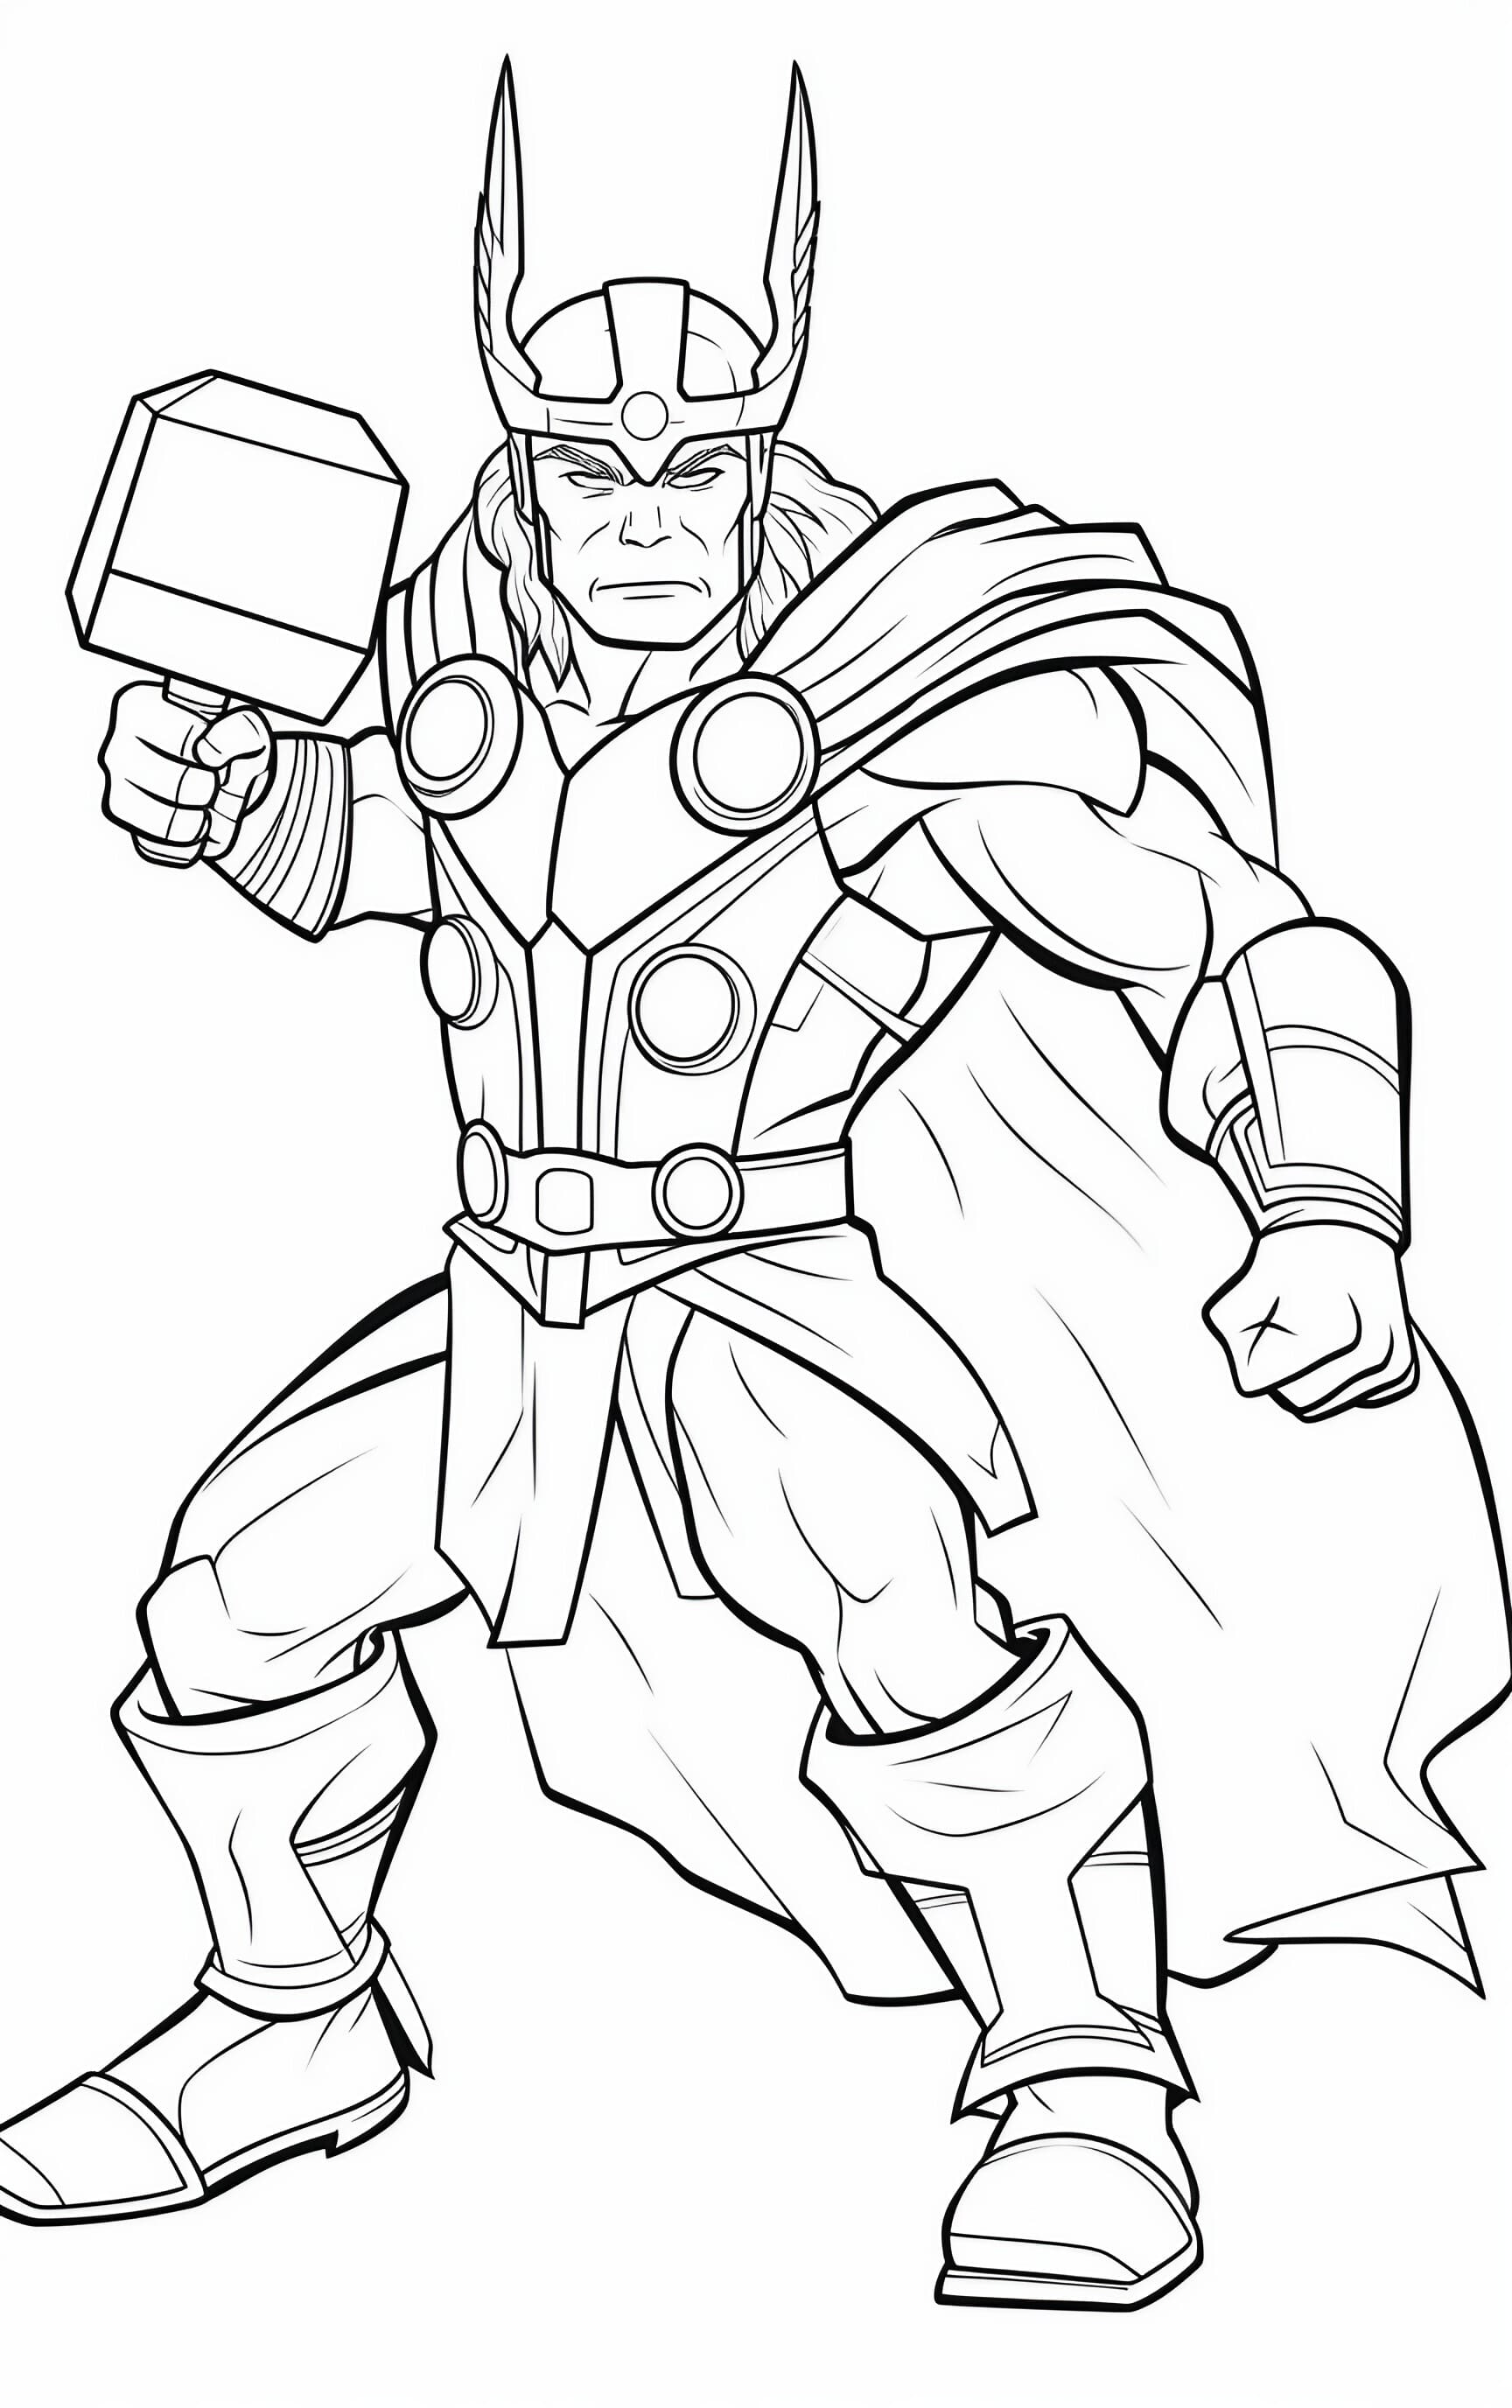 Superhero coloring pages for free